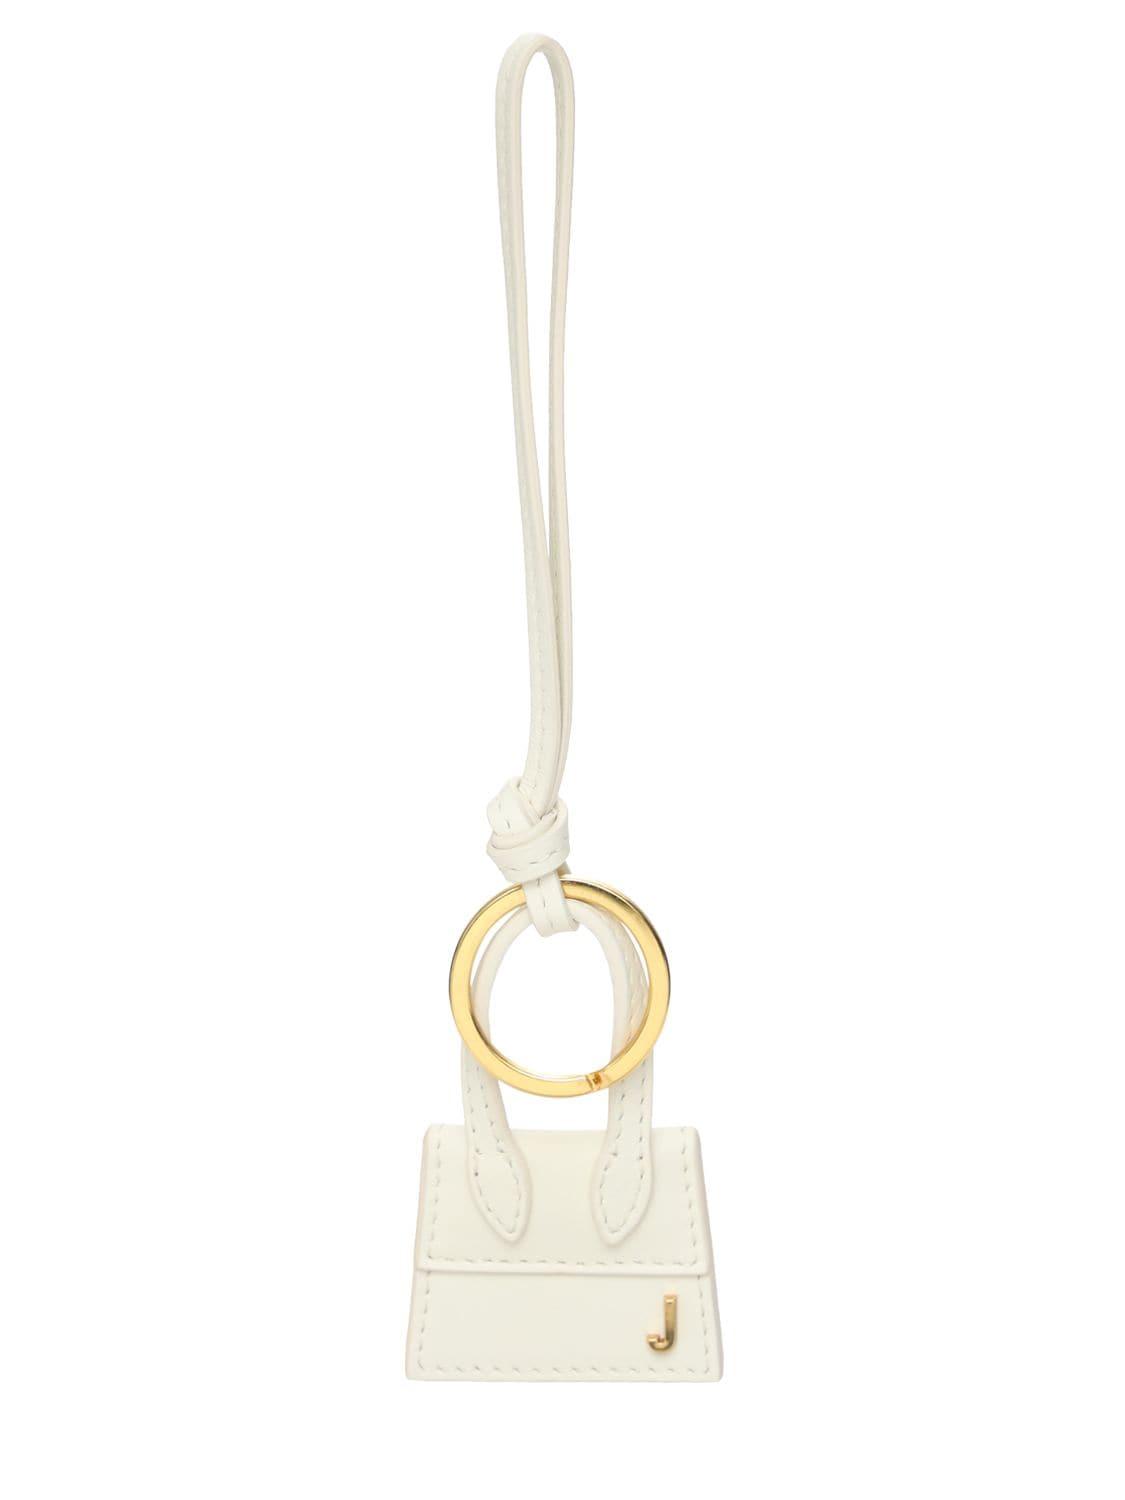 Jacquemus Le Porte Cle Chiquito Leather Key Holder in White for Men - Lyst